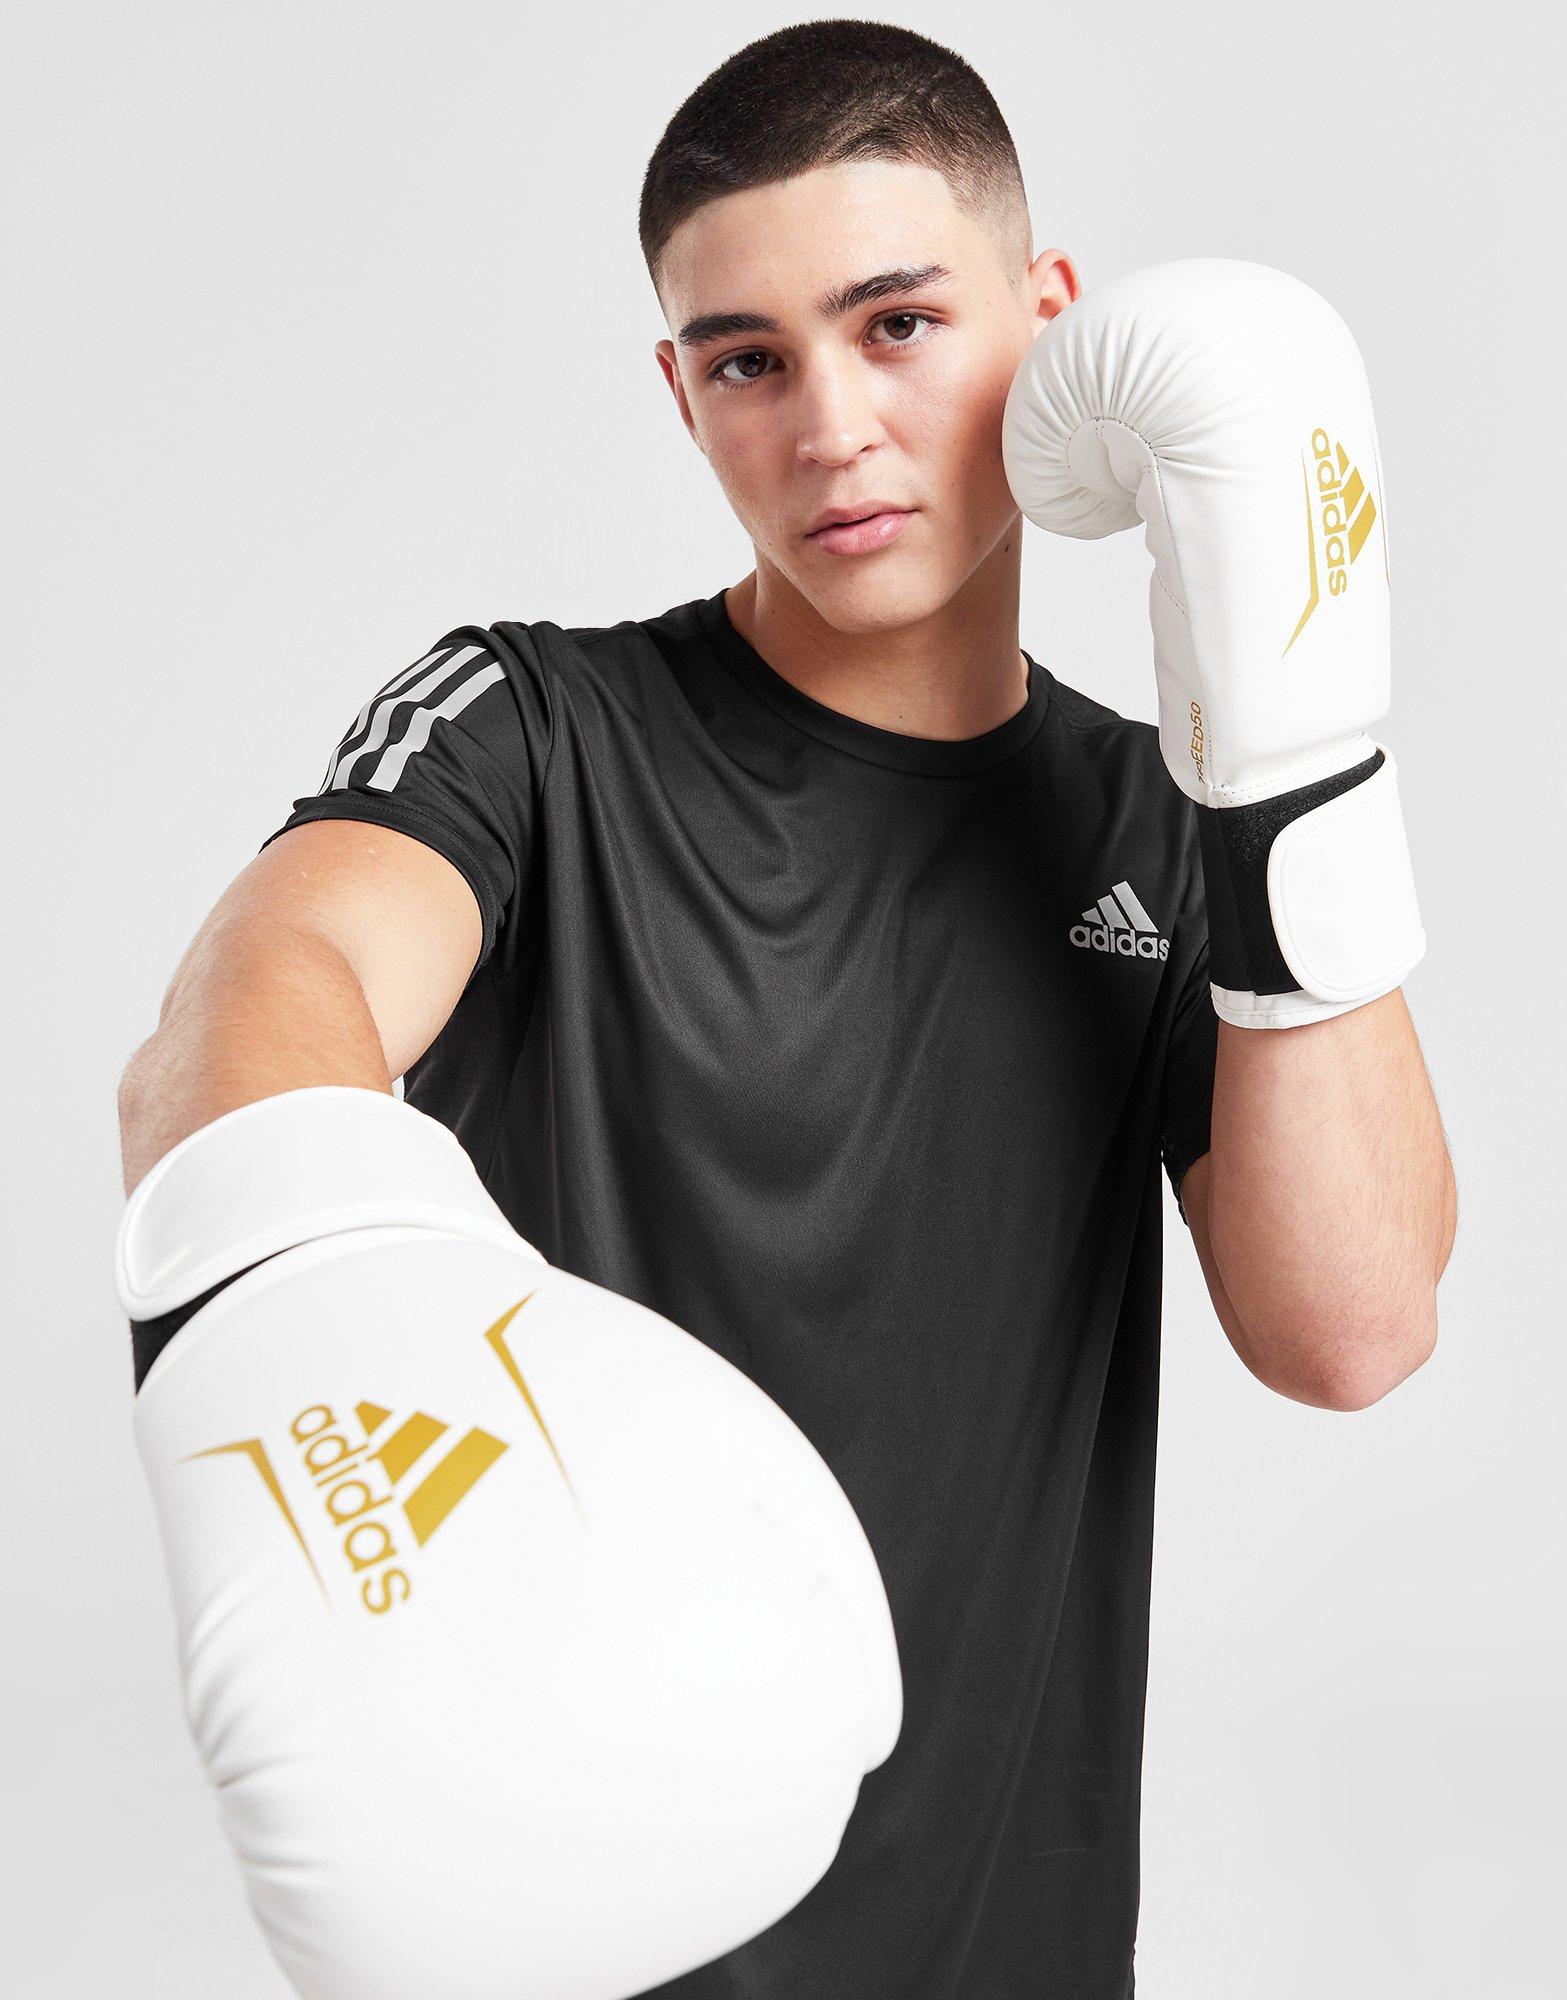 adidas boxing gloves speed 50